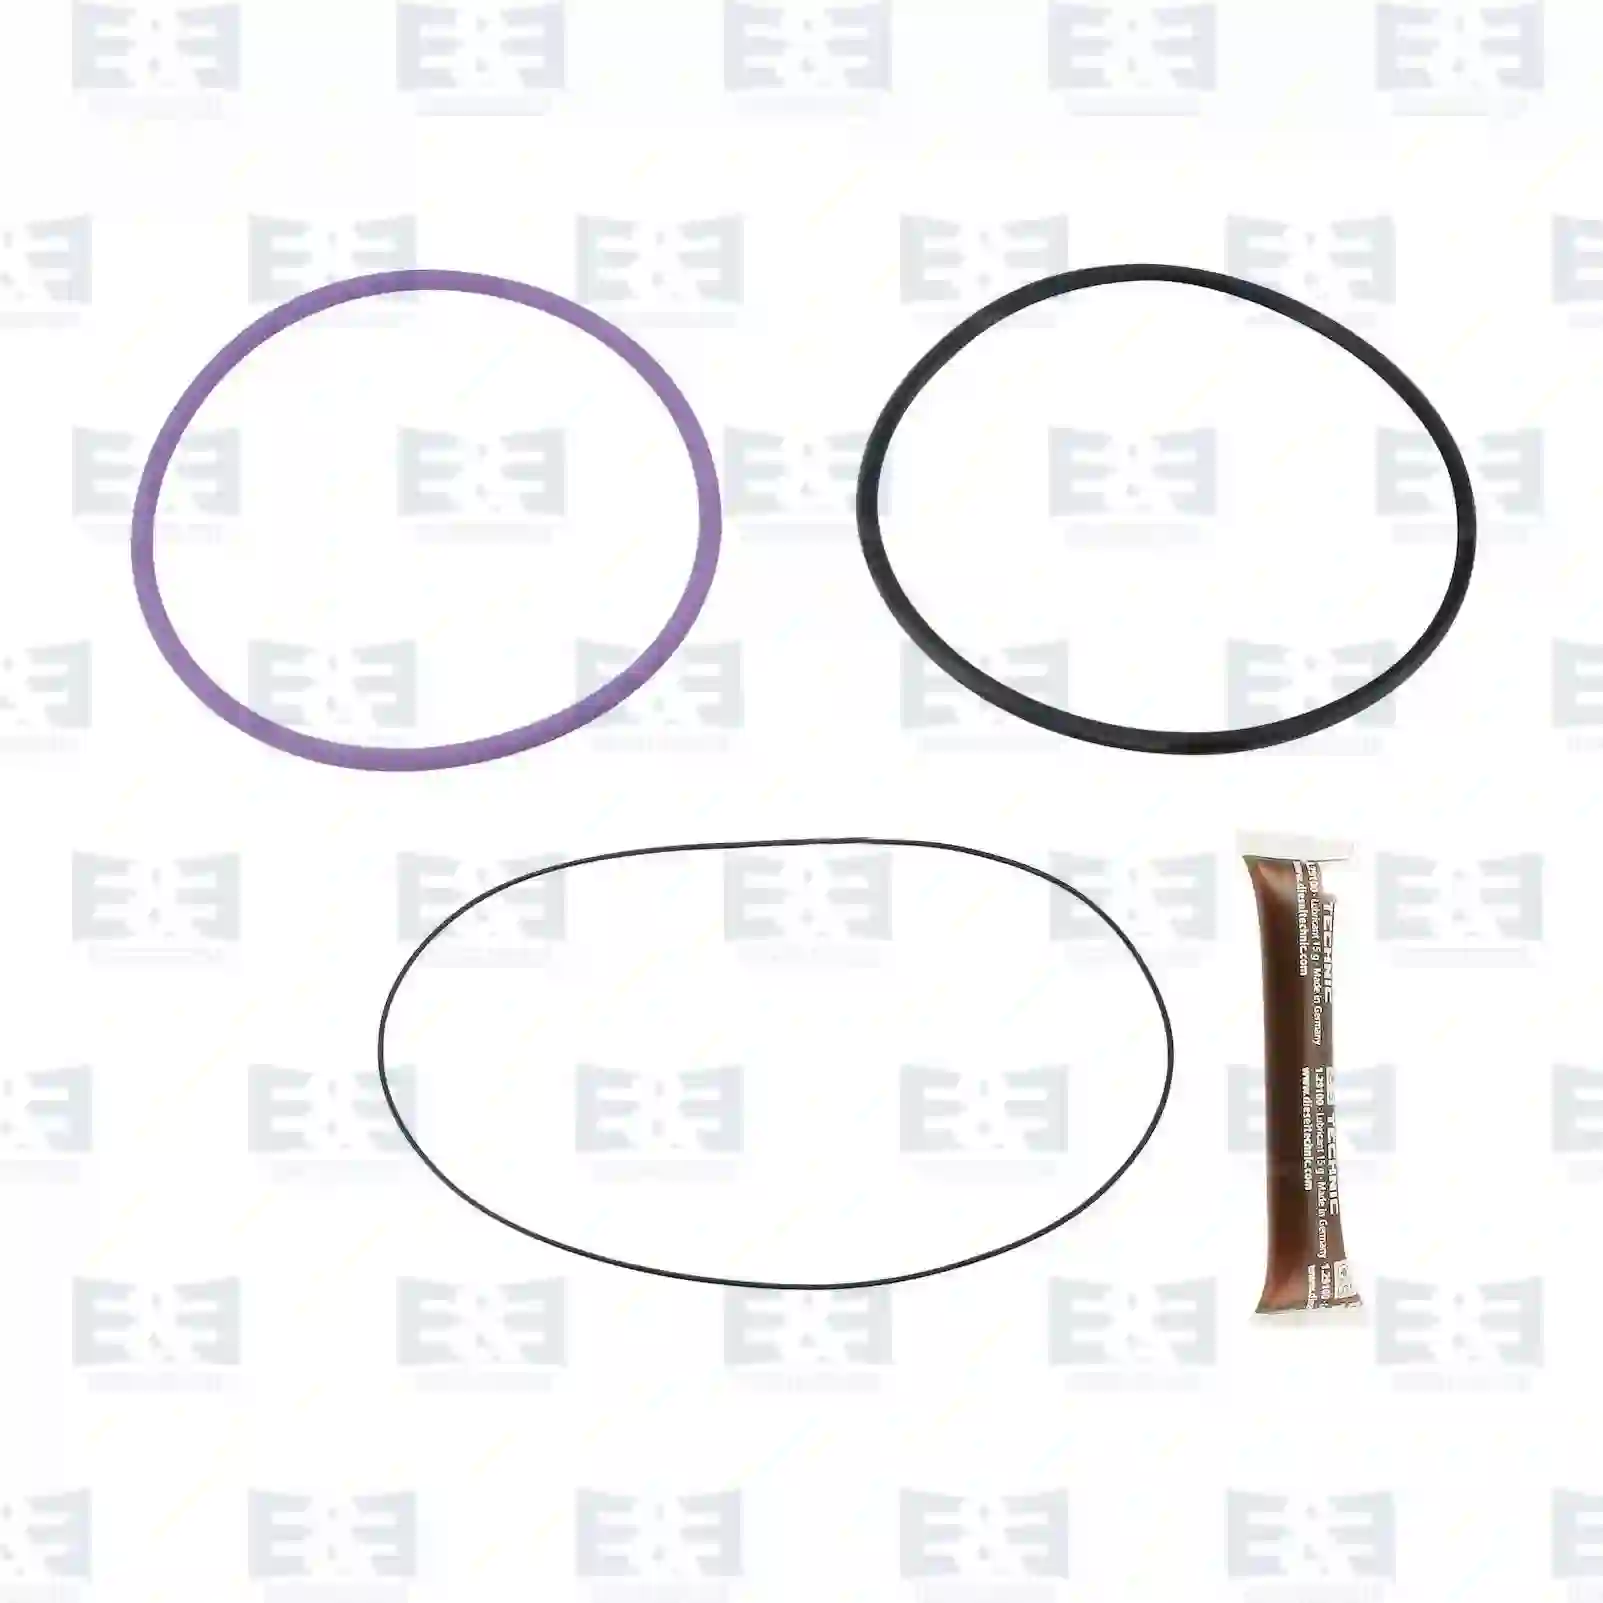 Seal ring kit, cylinder liner, 2E2209322, 271158, 275462, 275568, 275734, 275739 ||  2E2209322 E&E Truck Spare Parts | Truck Spare Parts, Auotomotive Spare Parts Seal ring kit, cylinder liner, 2E2209322, 271158, 275462, 275568, 275734, 275739 ||  2E2209322 E&E Truck Spare Parts | Truck Spare Parts, Auotomotive Spare Parts